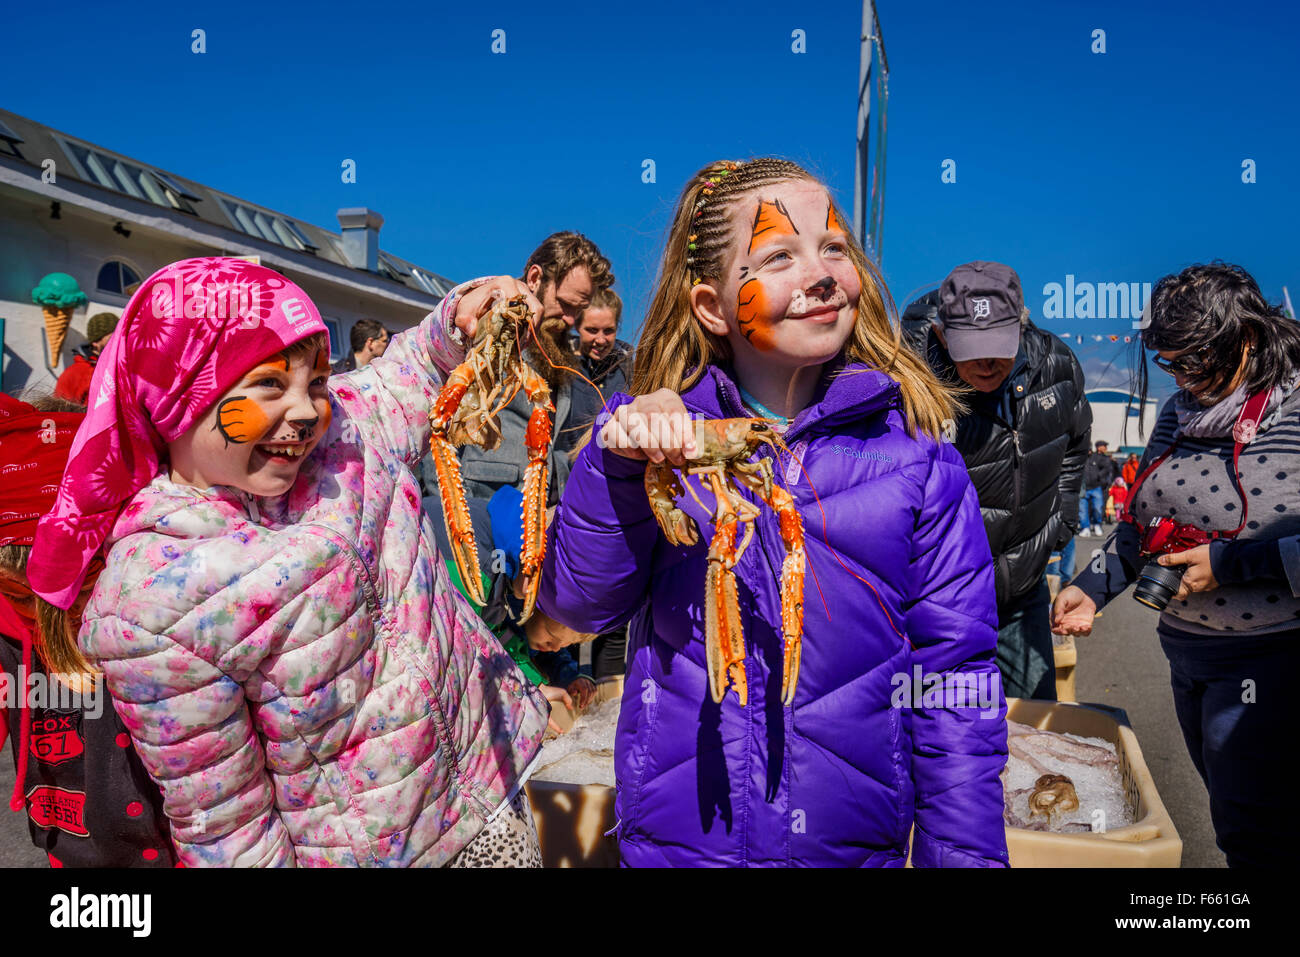 Girls holding lobsters at the annual Seaman's day festival, Reykjavik, Iceland Stock Photo